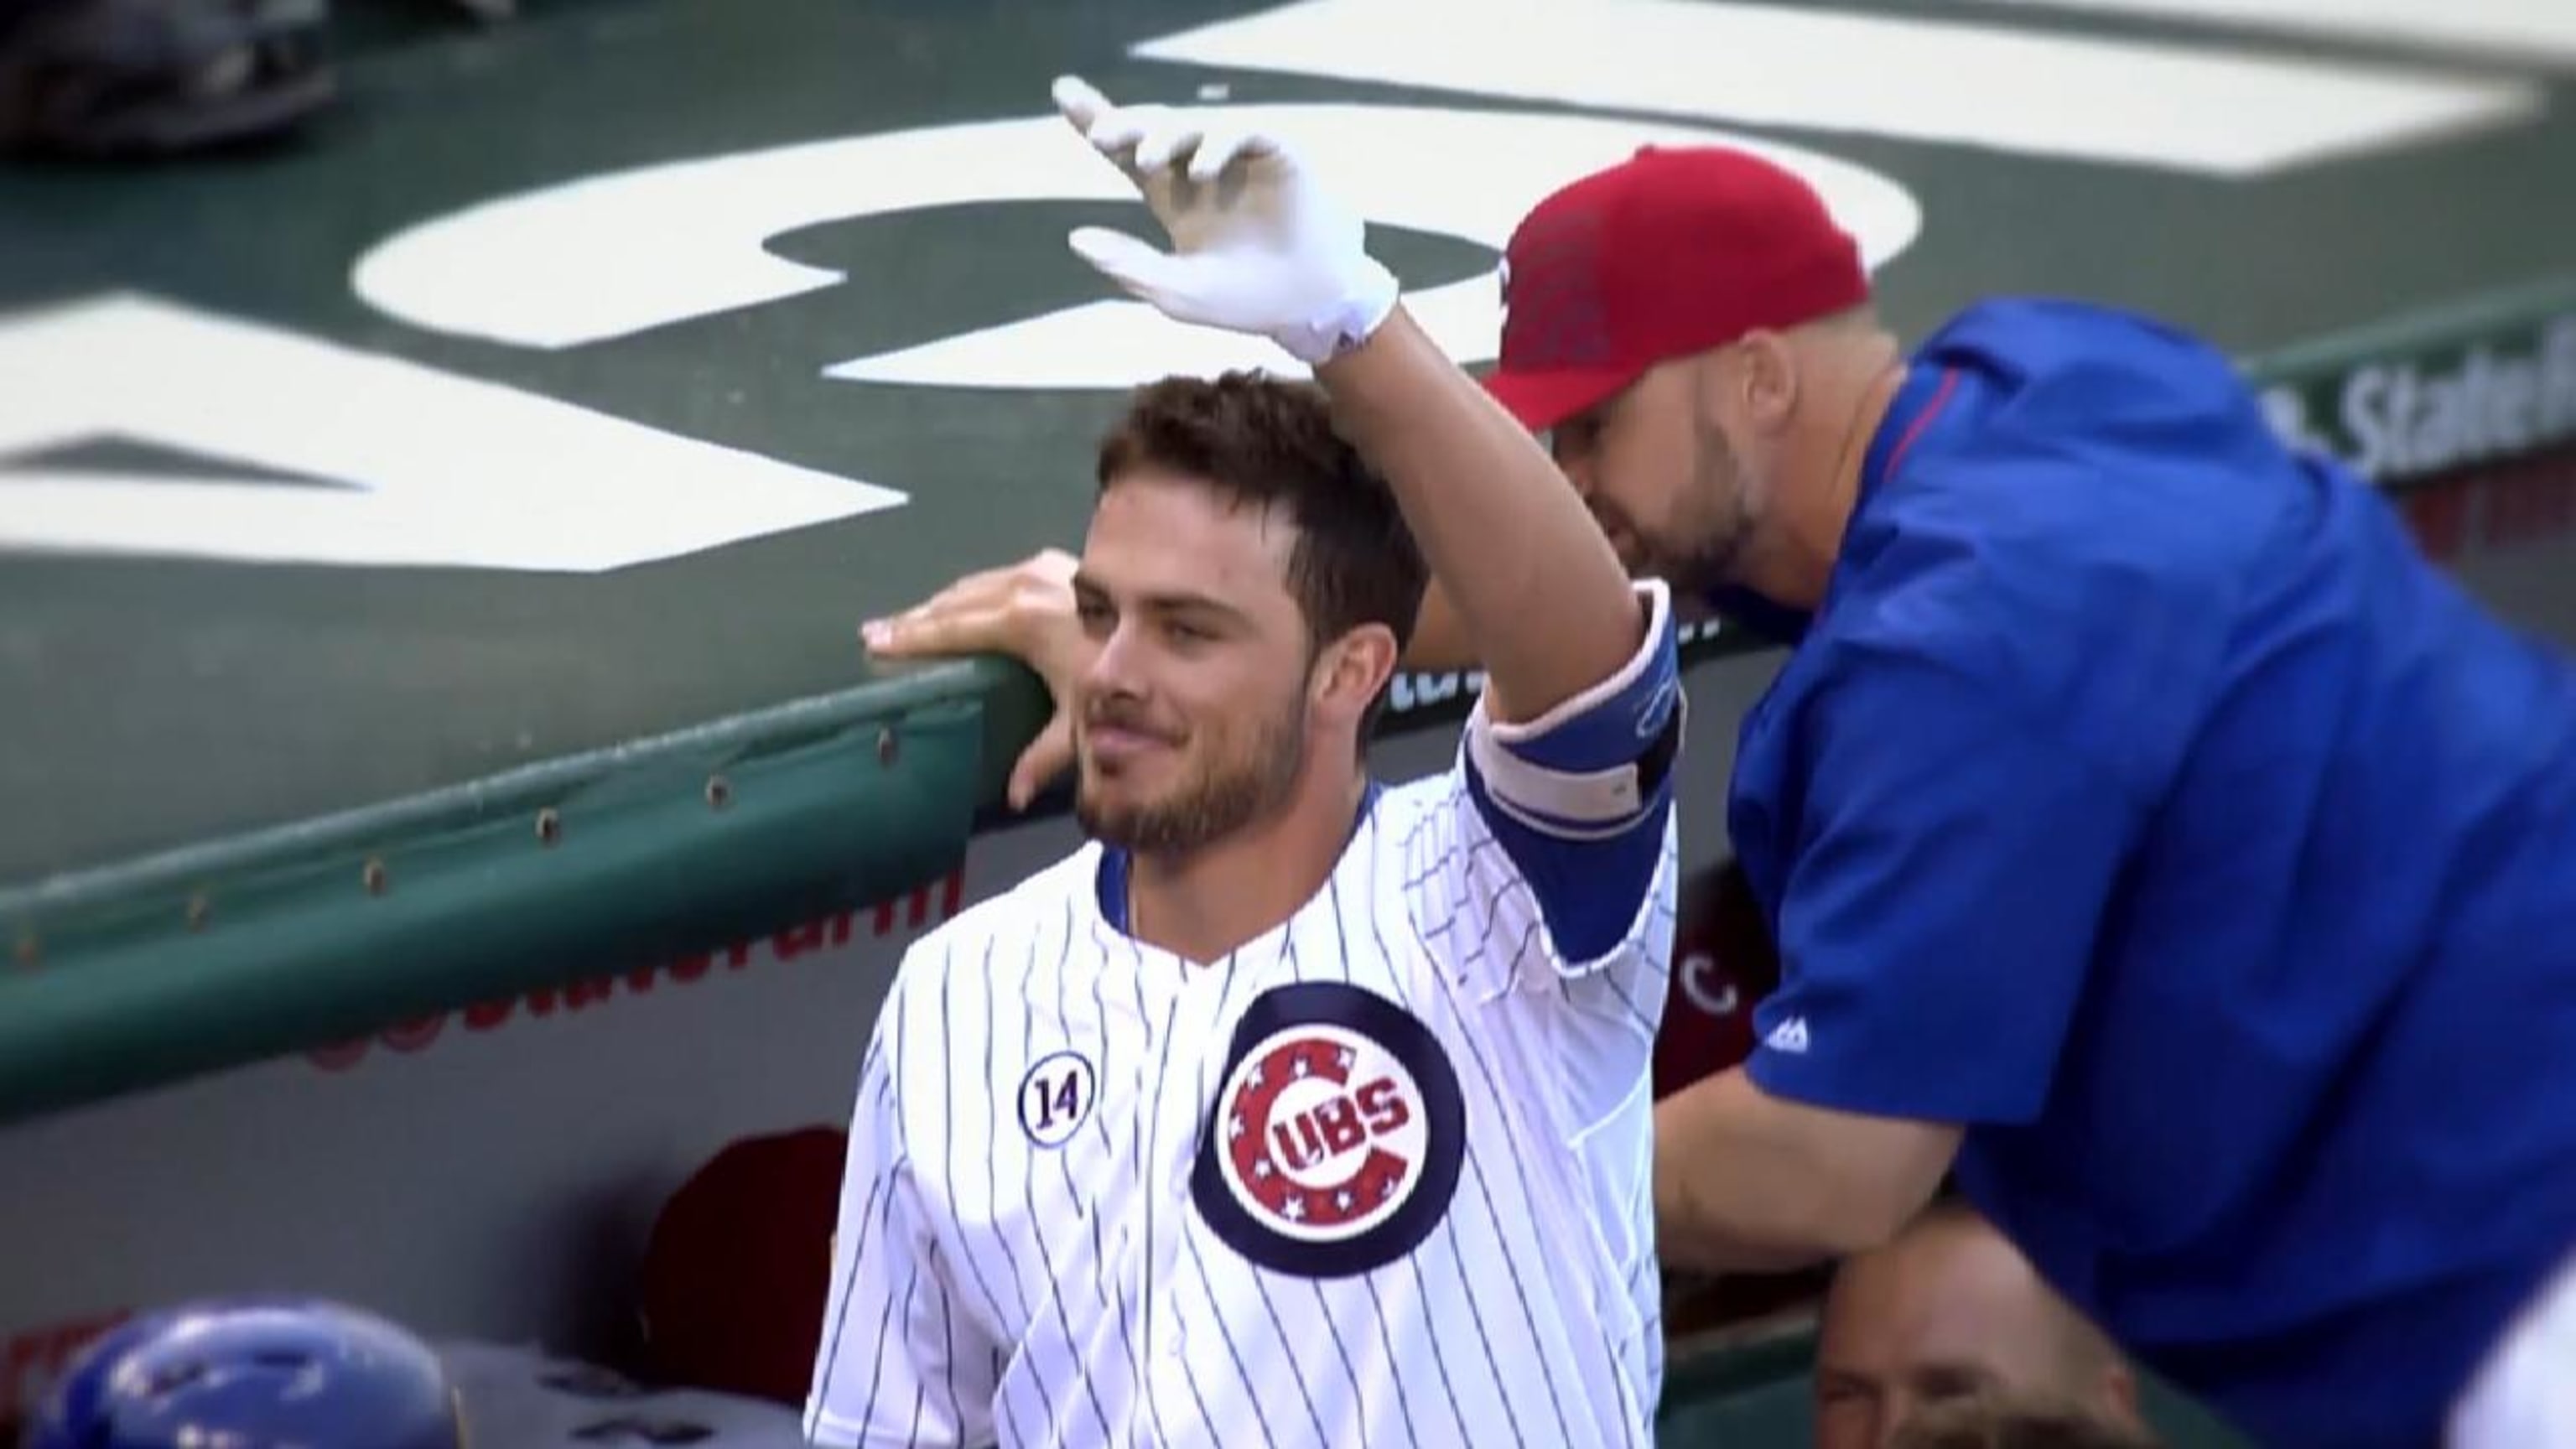 Price of winning: Cubs' Kris Bryant has top-selling MLB jersey - ABC7 New  York